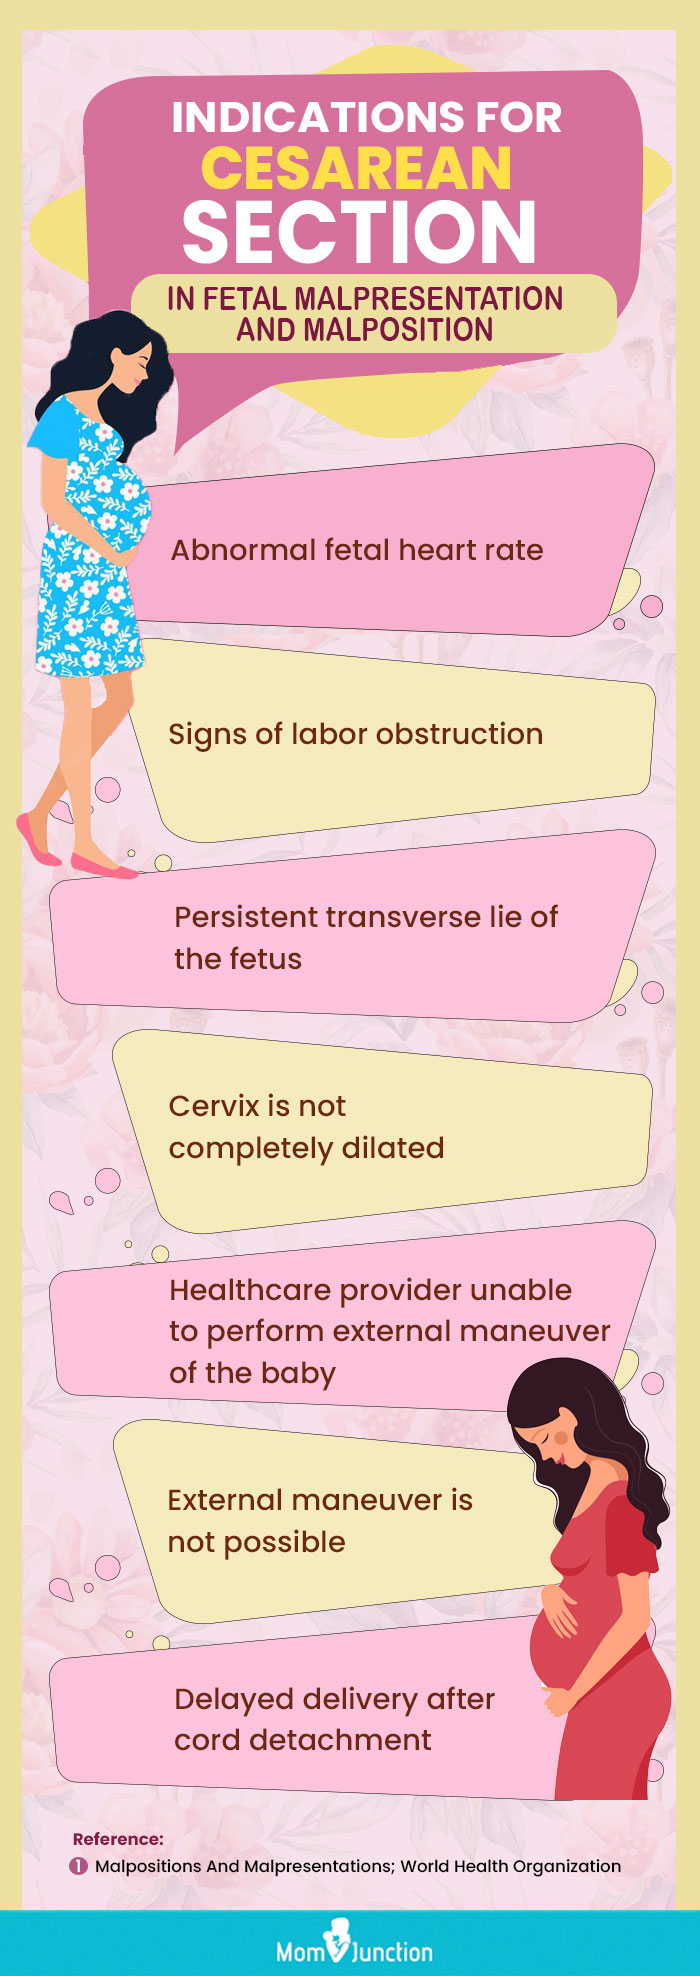 indications for cesarean section in fetal malpresentation and malposition (infographic)